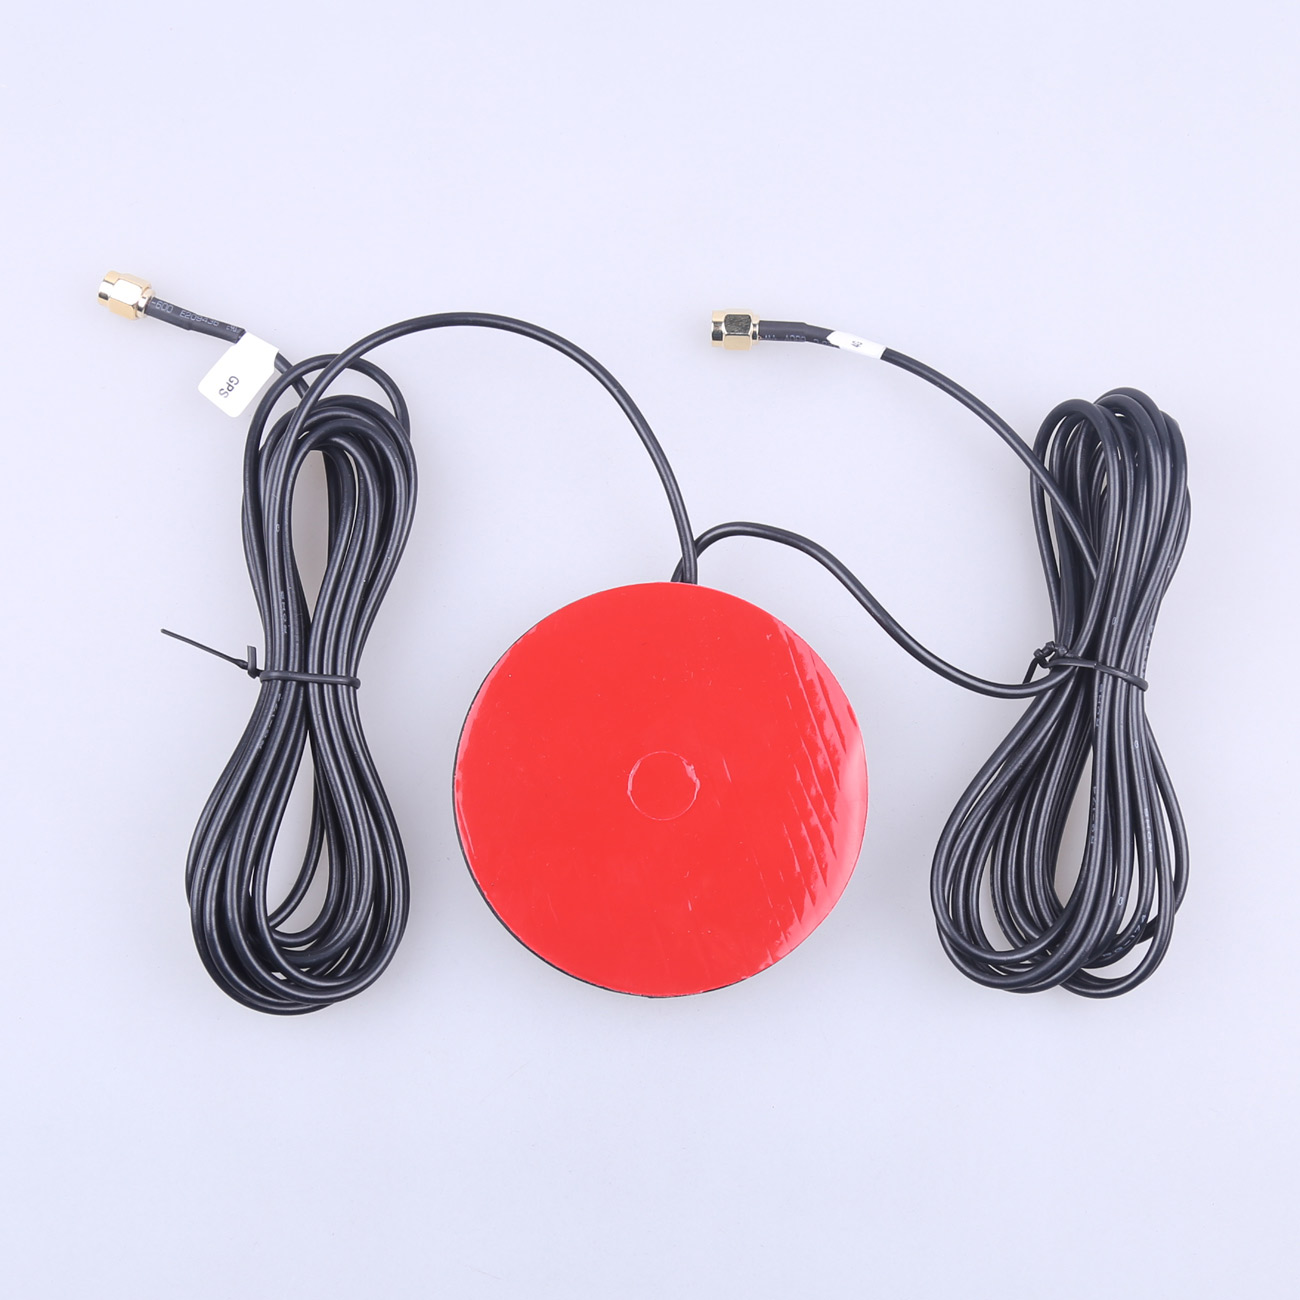 Kinghelm GNSS Glonass Antenna 4G communication+GPS positioning two-in-one outer disc-KH1 (G4) C100-B02